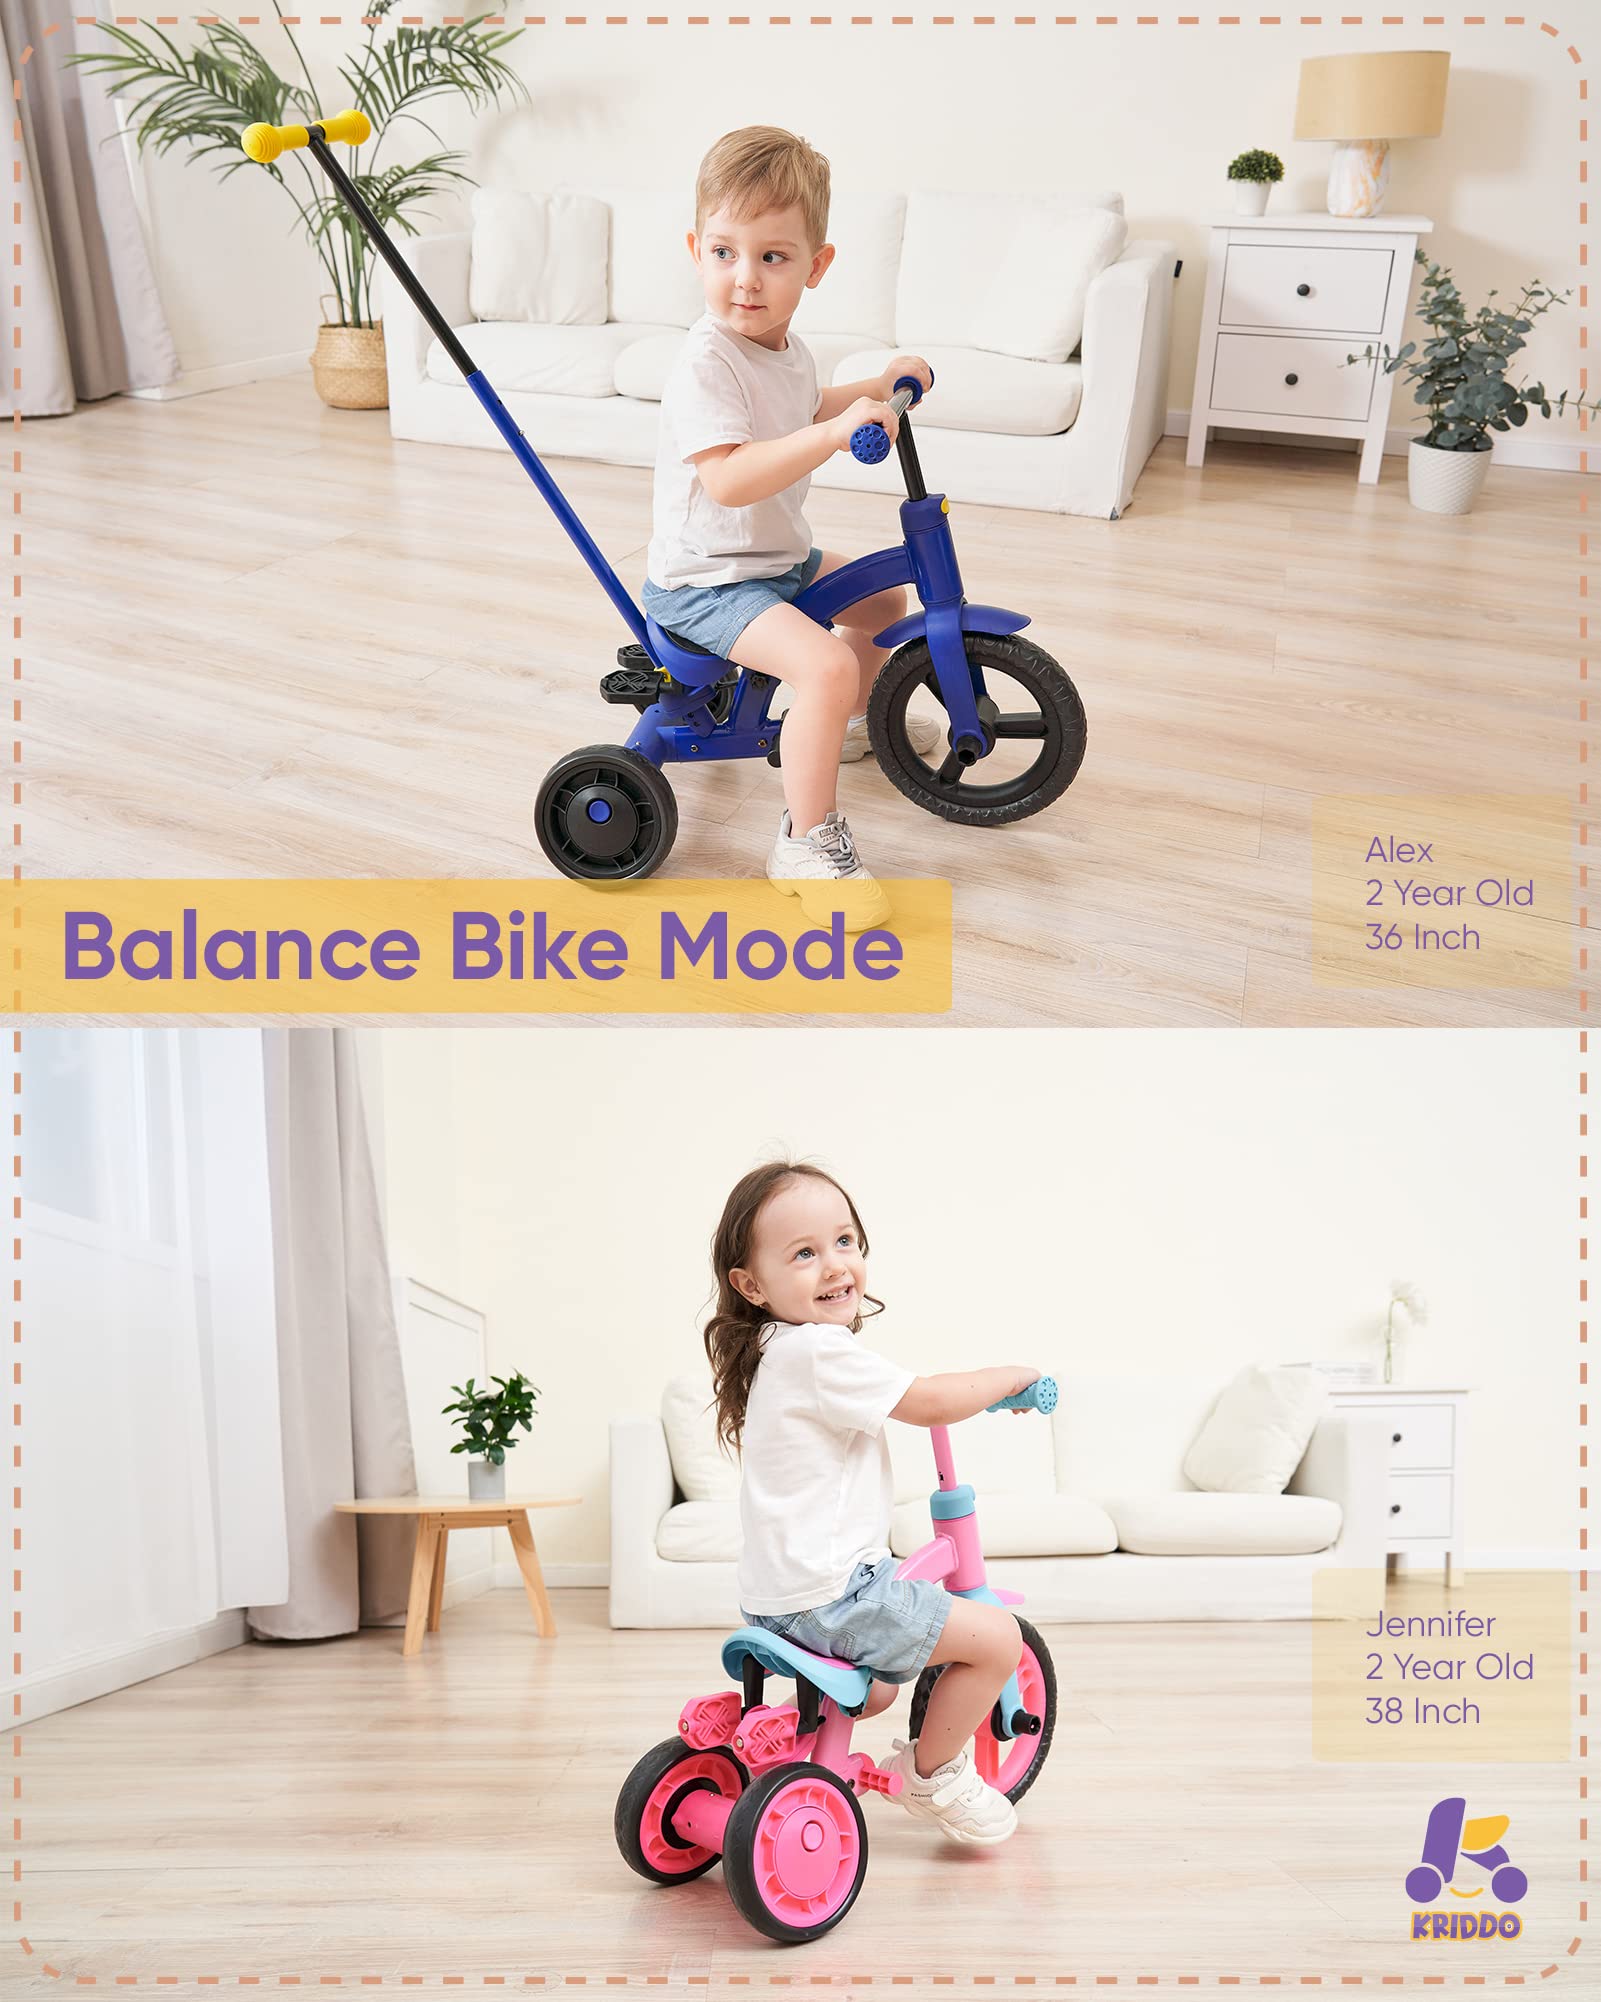 KRIDDO 4-in-1 Kids Tricycle for 1.5 to 3 Yea Old with Parent Steering Push Handle, 12 Inch Front Wheel Trike, Toddler Balance Bike for Boys Girls 18 Month to 3 Years, Adjustable Height, Blue